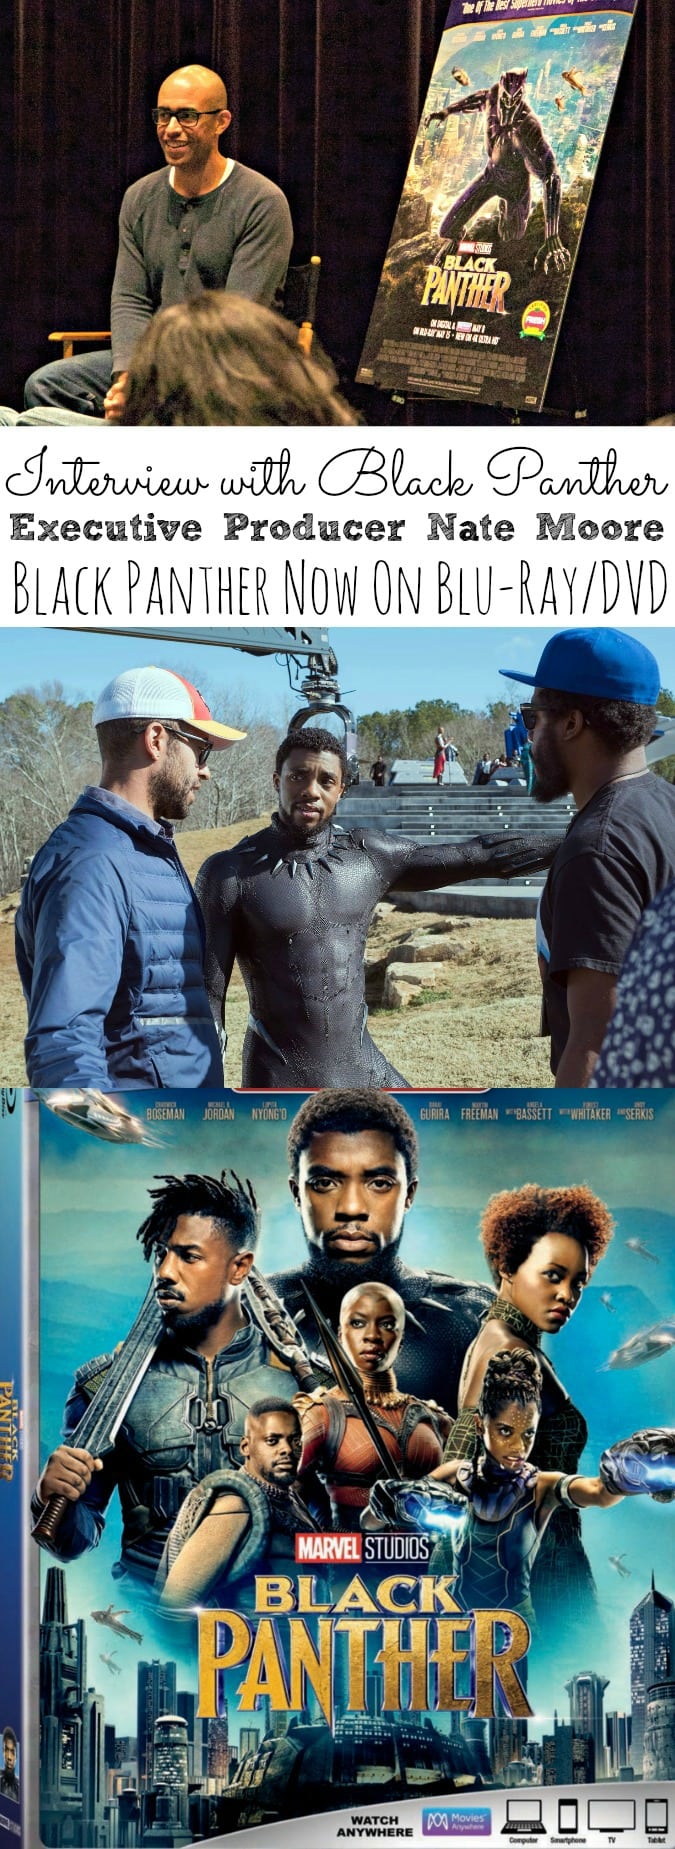 Black Panther Interview with Nate Moore